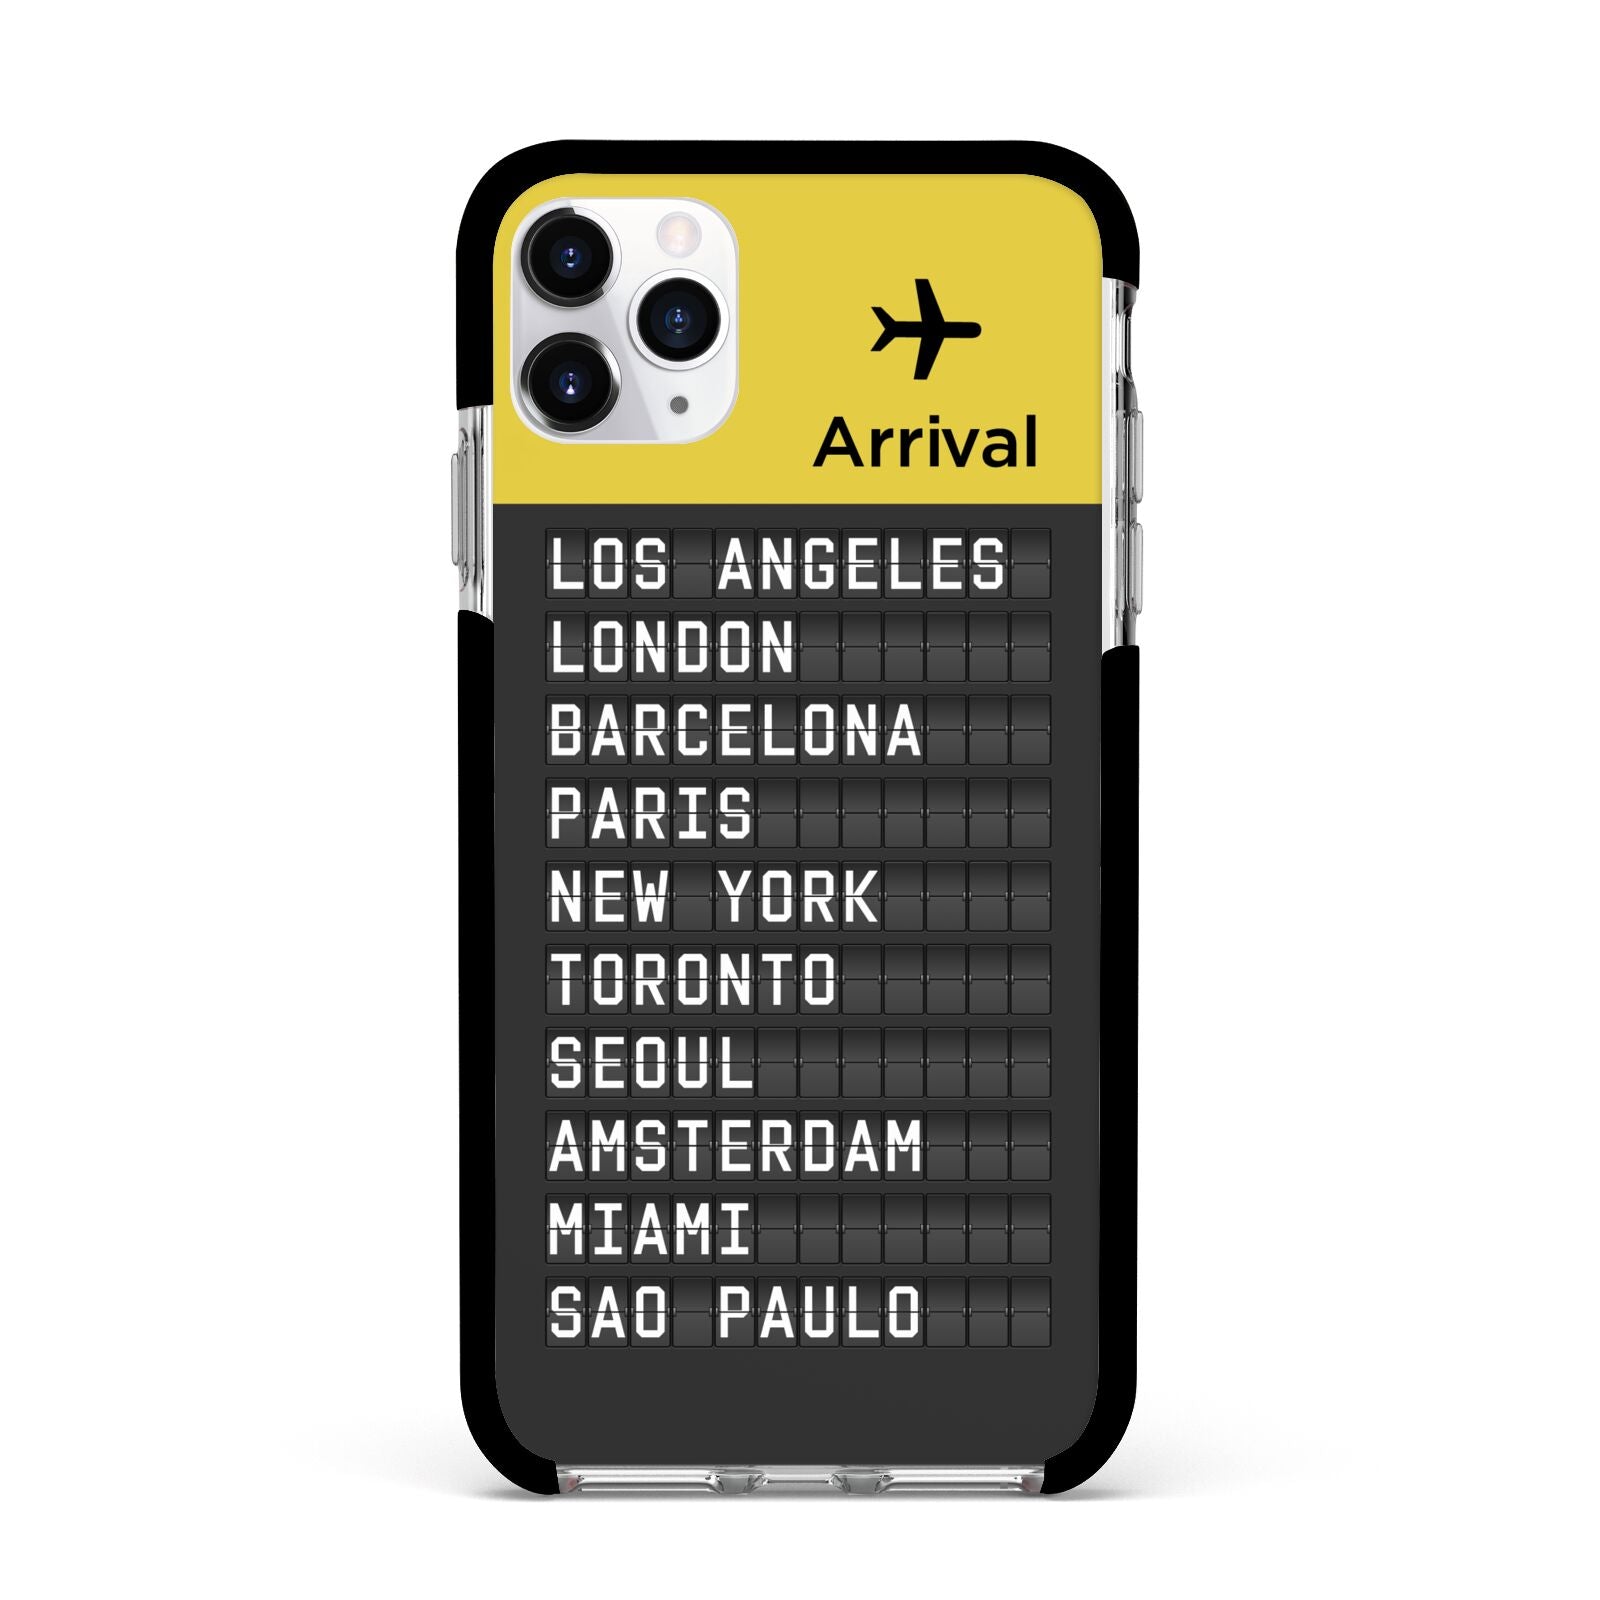 Airport Arrivals Board Apple iPhone 11 Pro Max in Silver with Black Impact Case